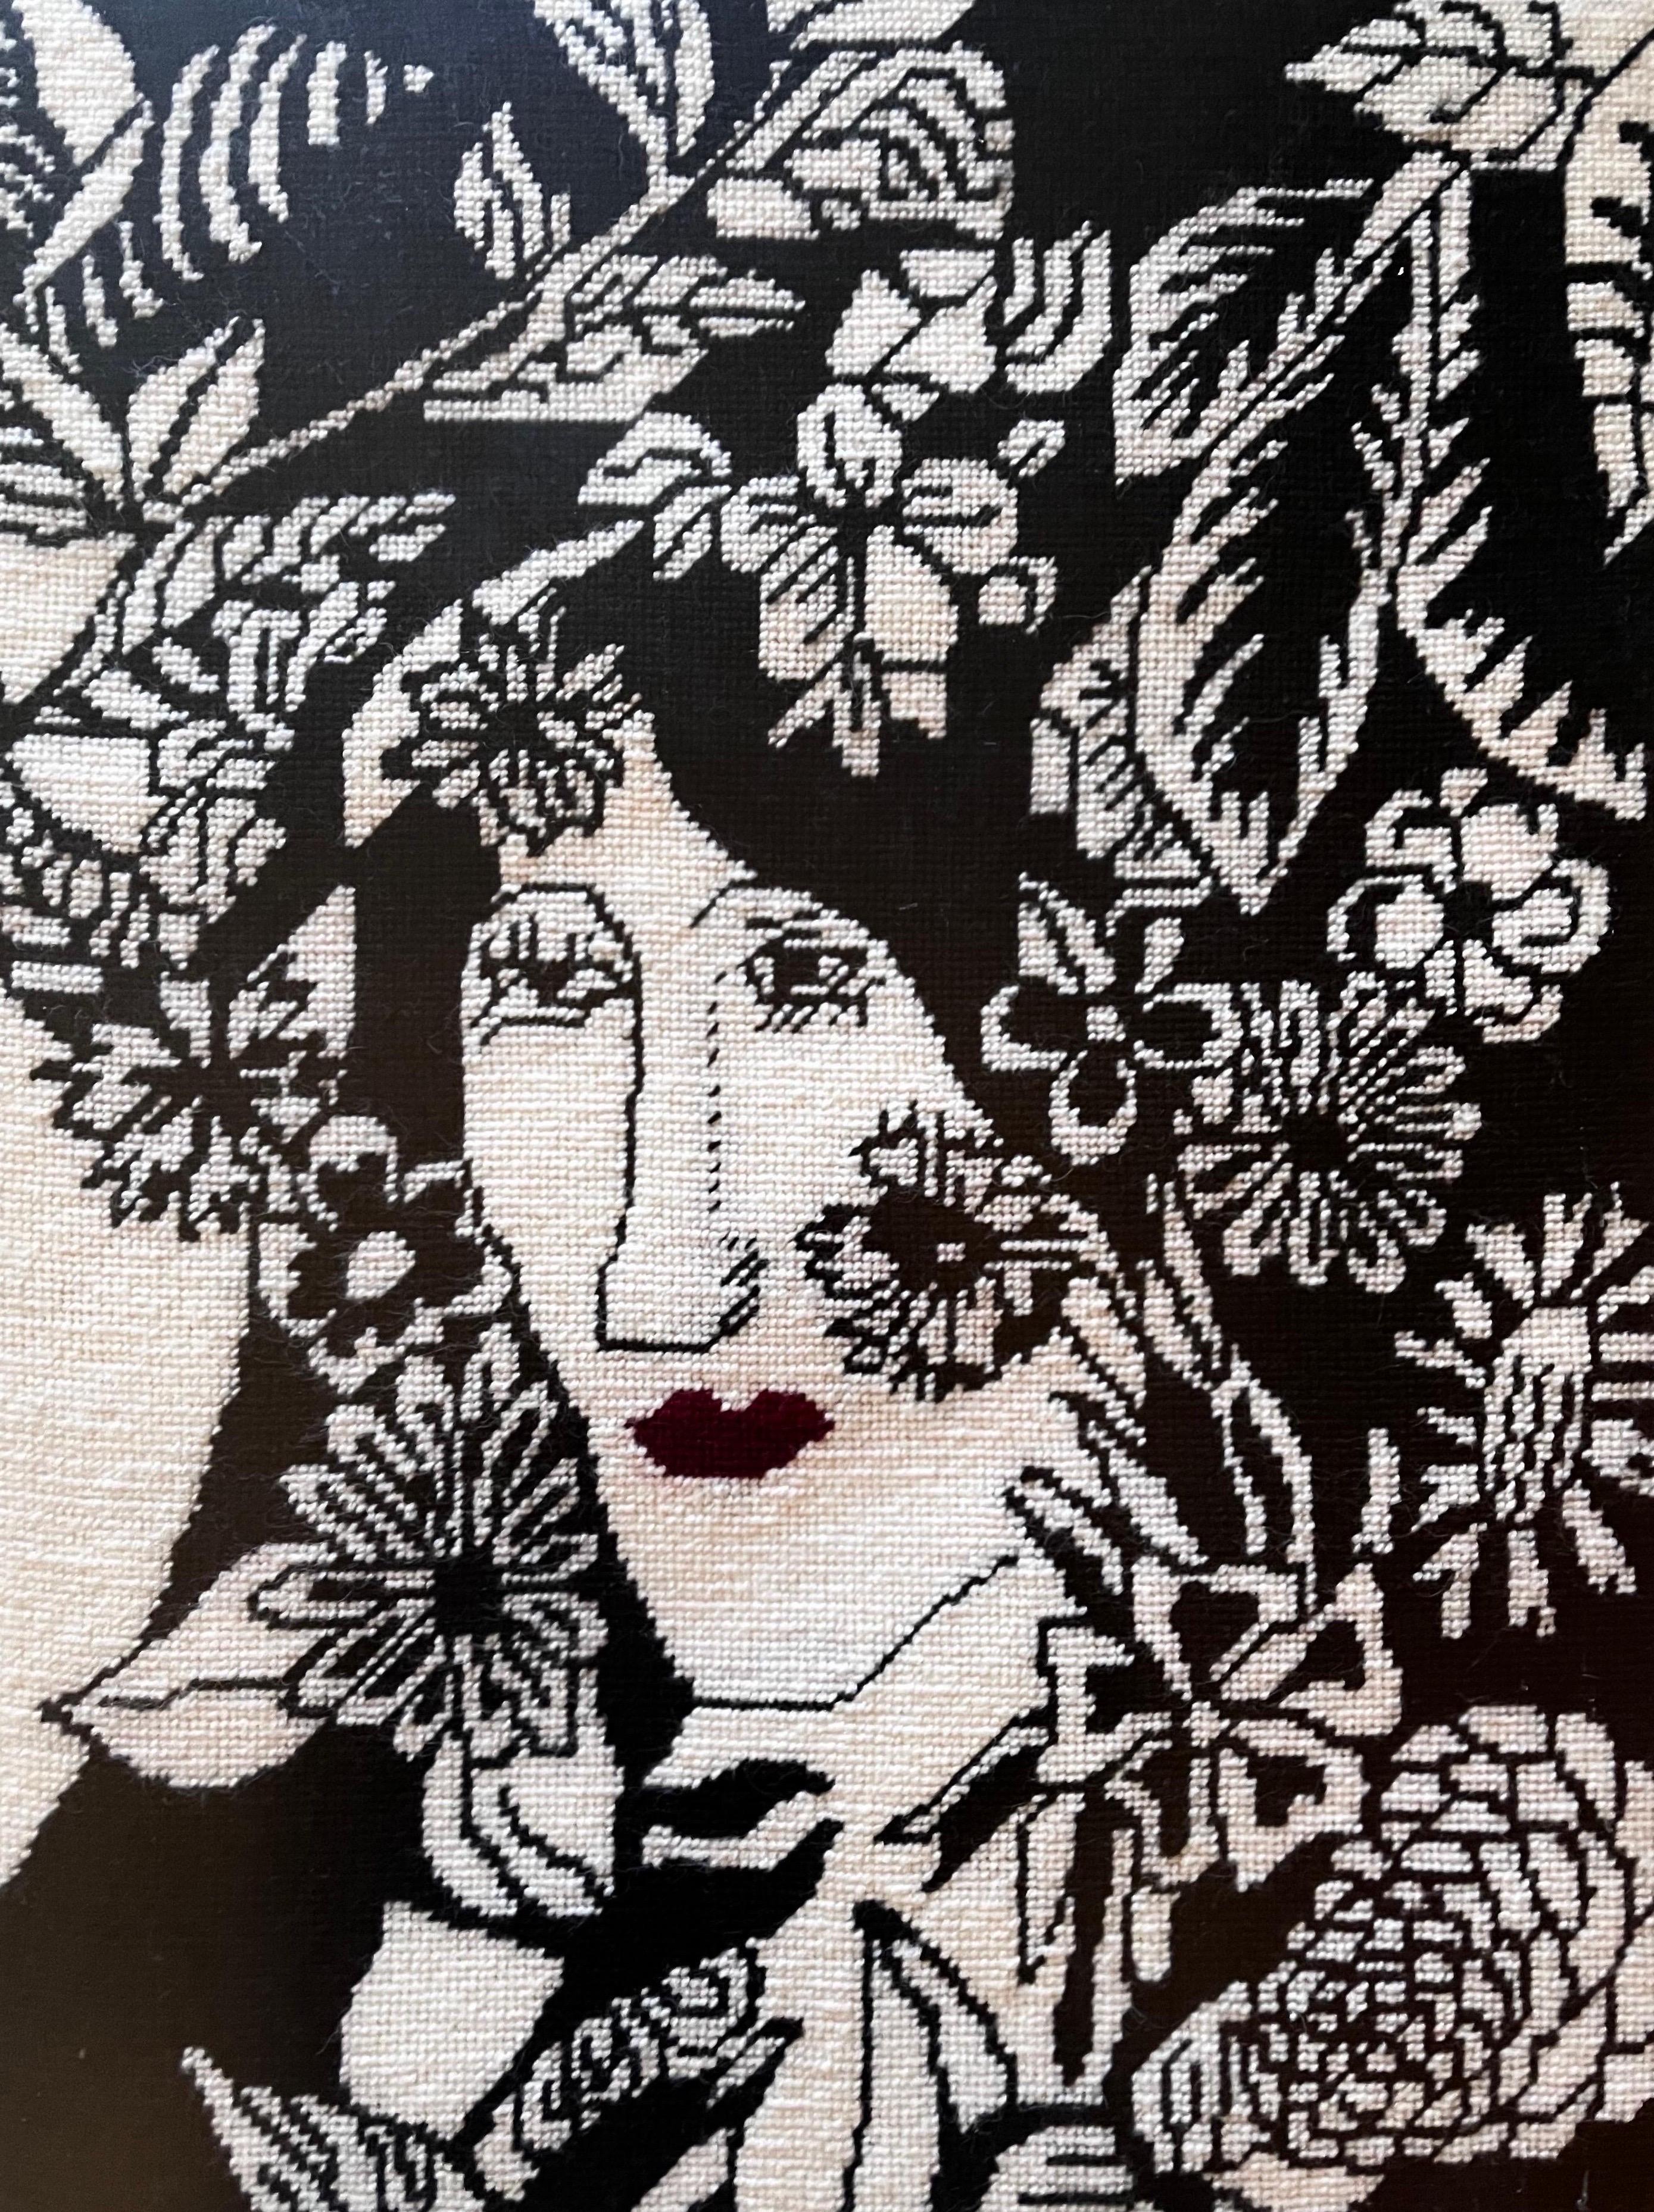 Bohemian Black and White Portrait in Needlepoint For Sale